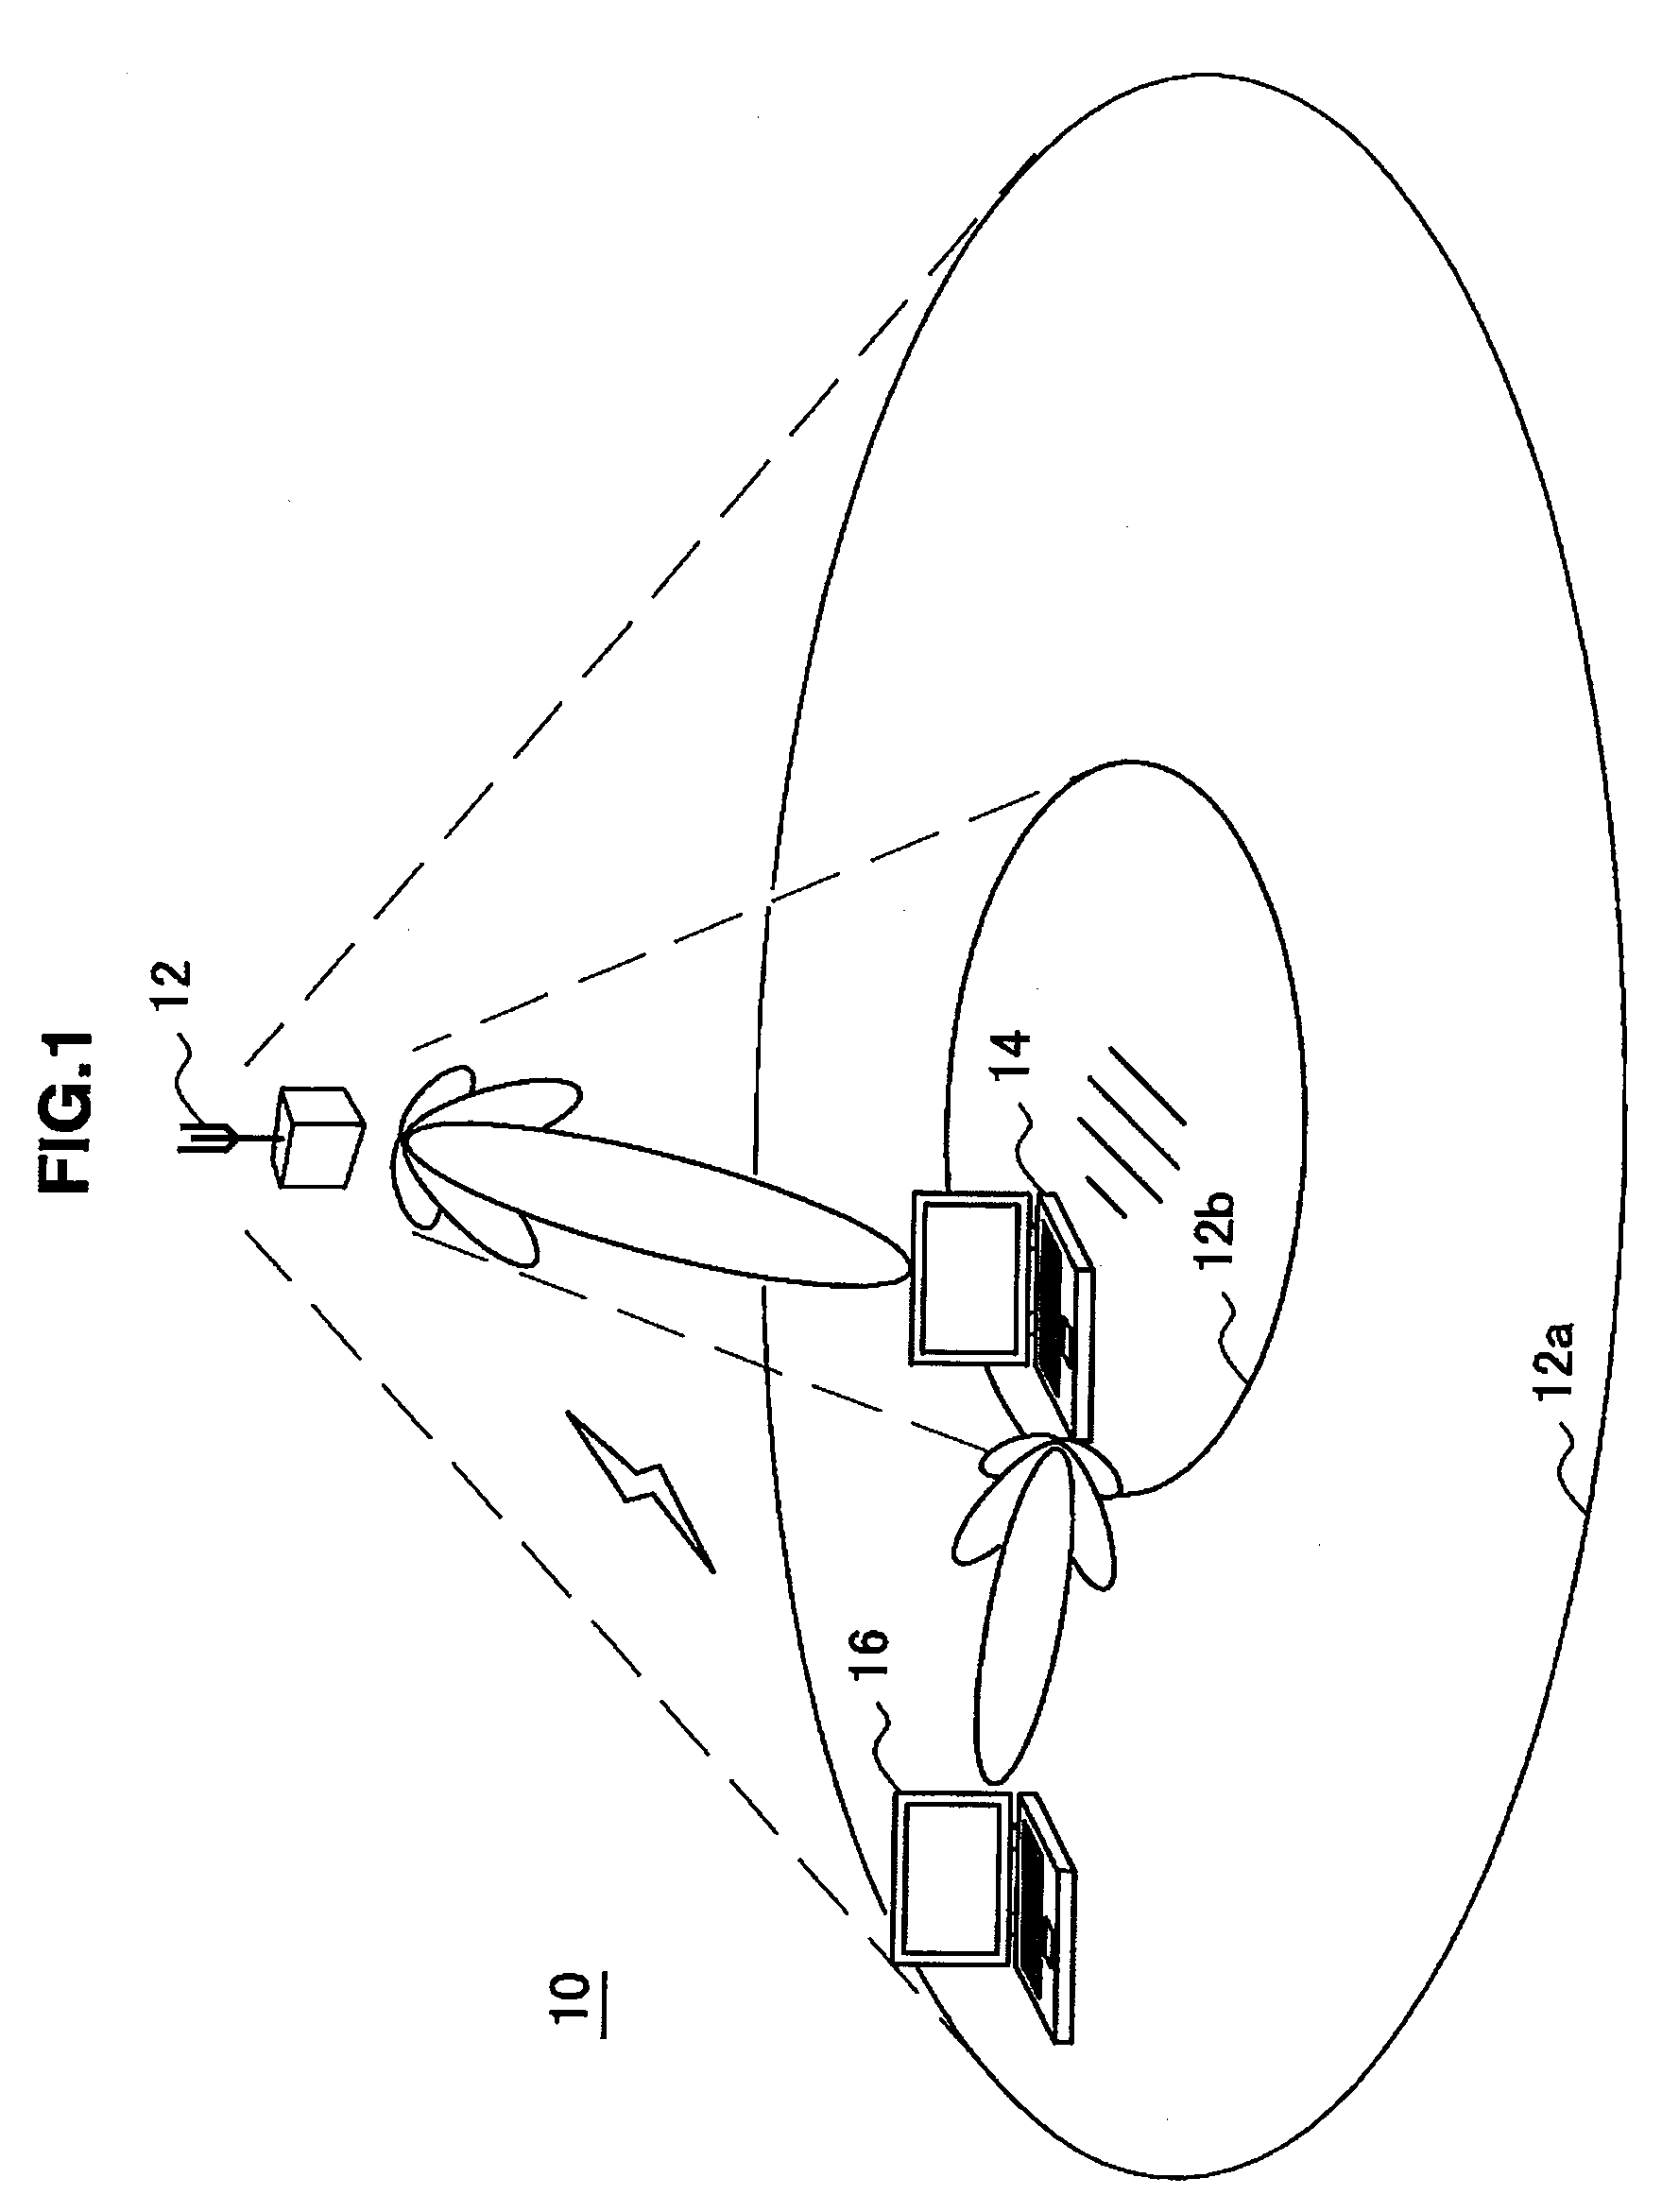 Wireless power and communication system